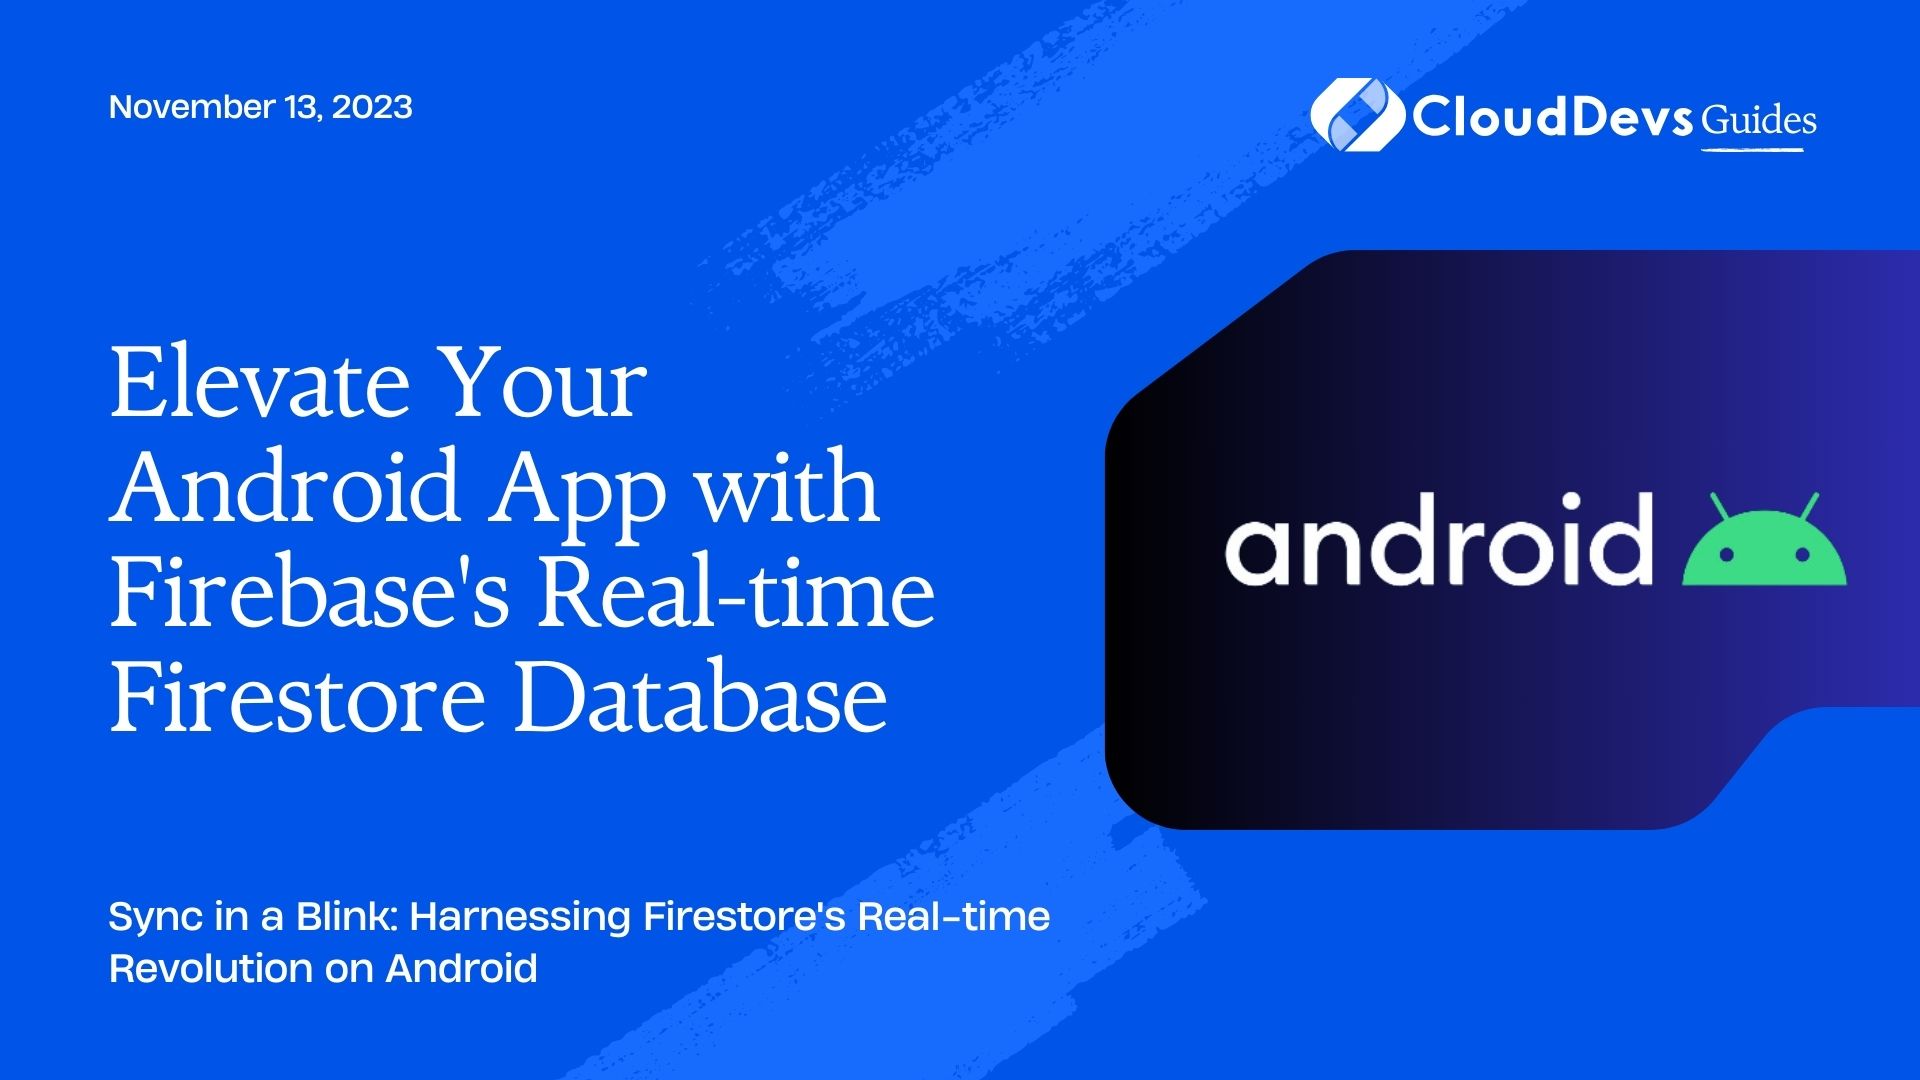 Elevate Your Android App with Firebase's Real-time Firestore Database